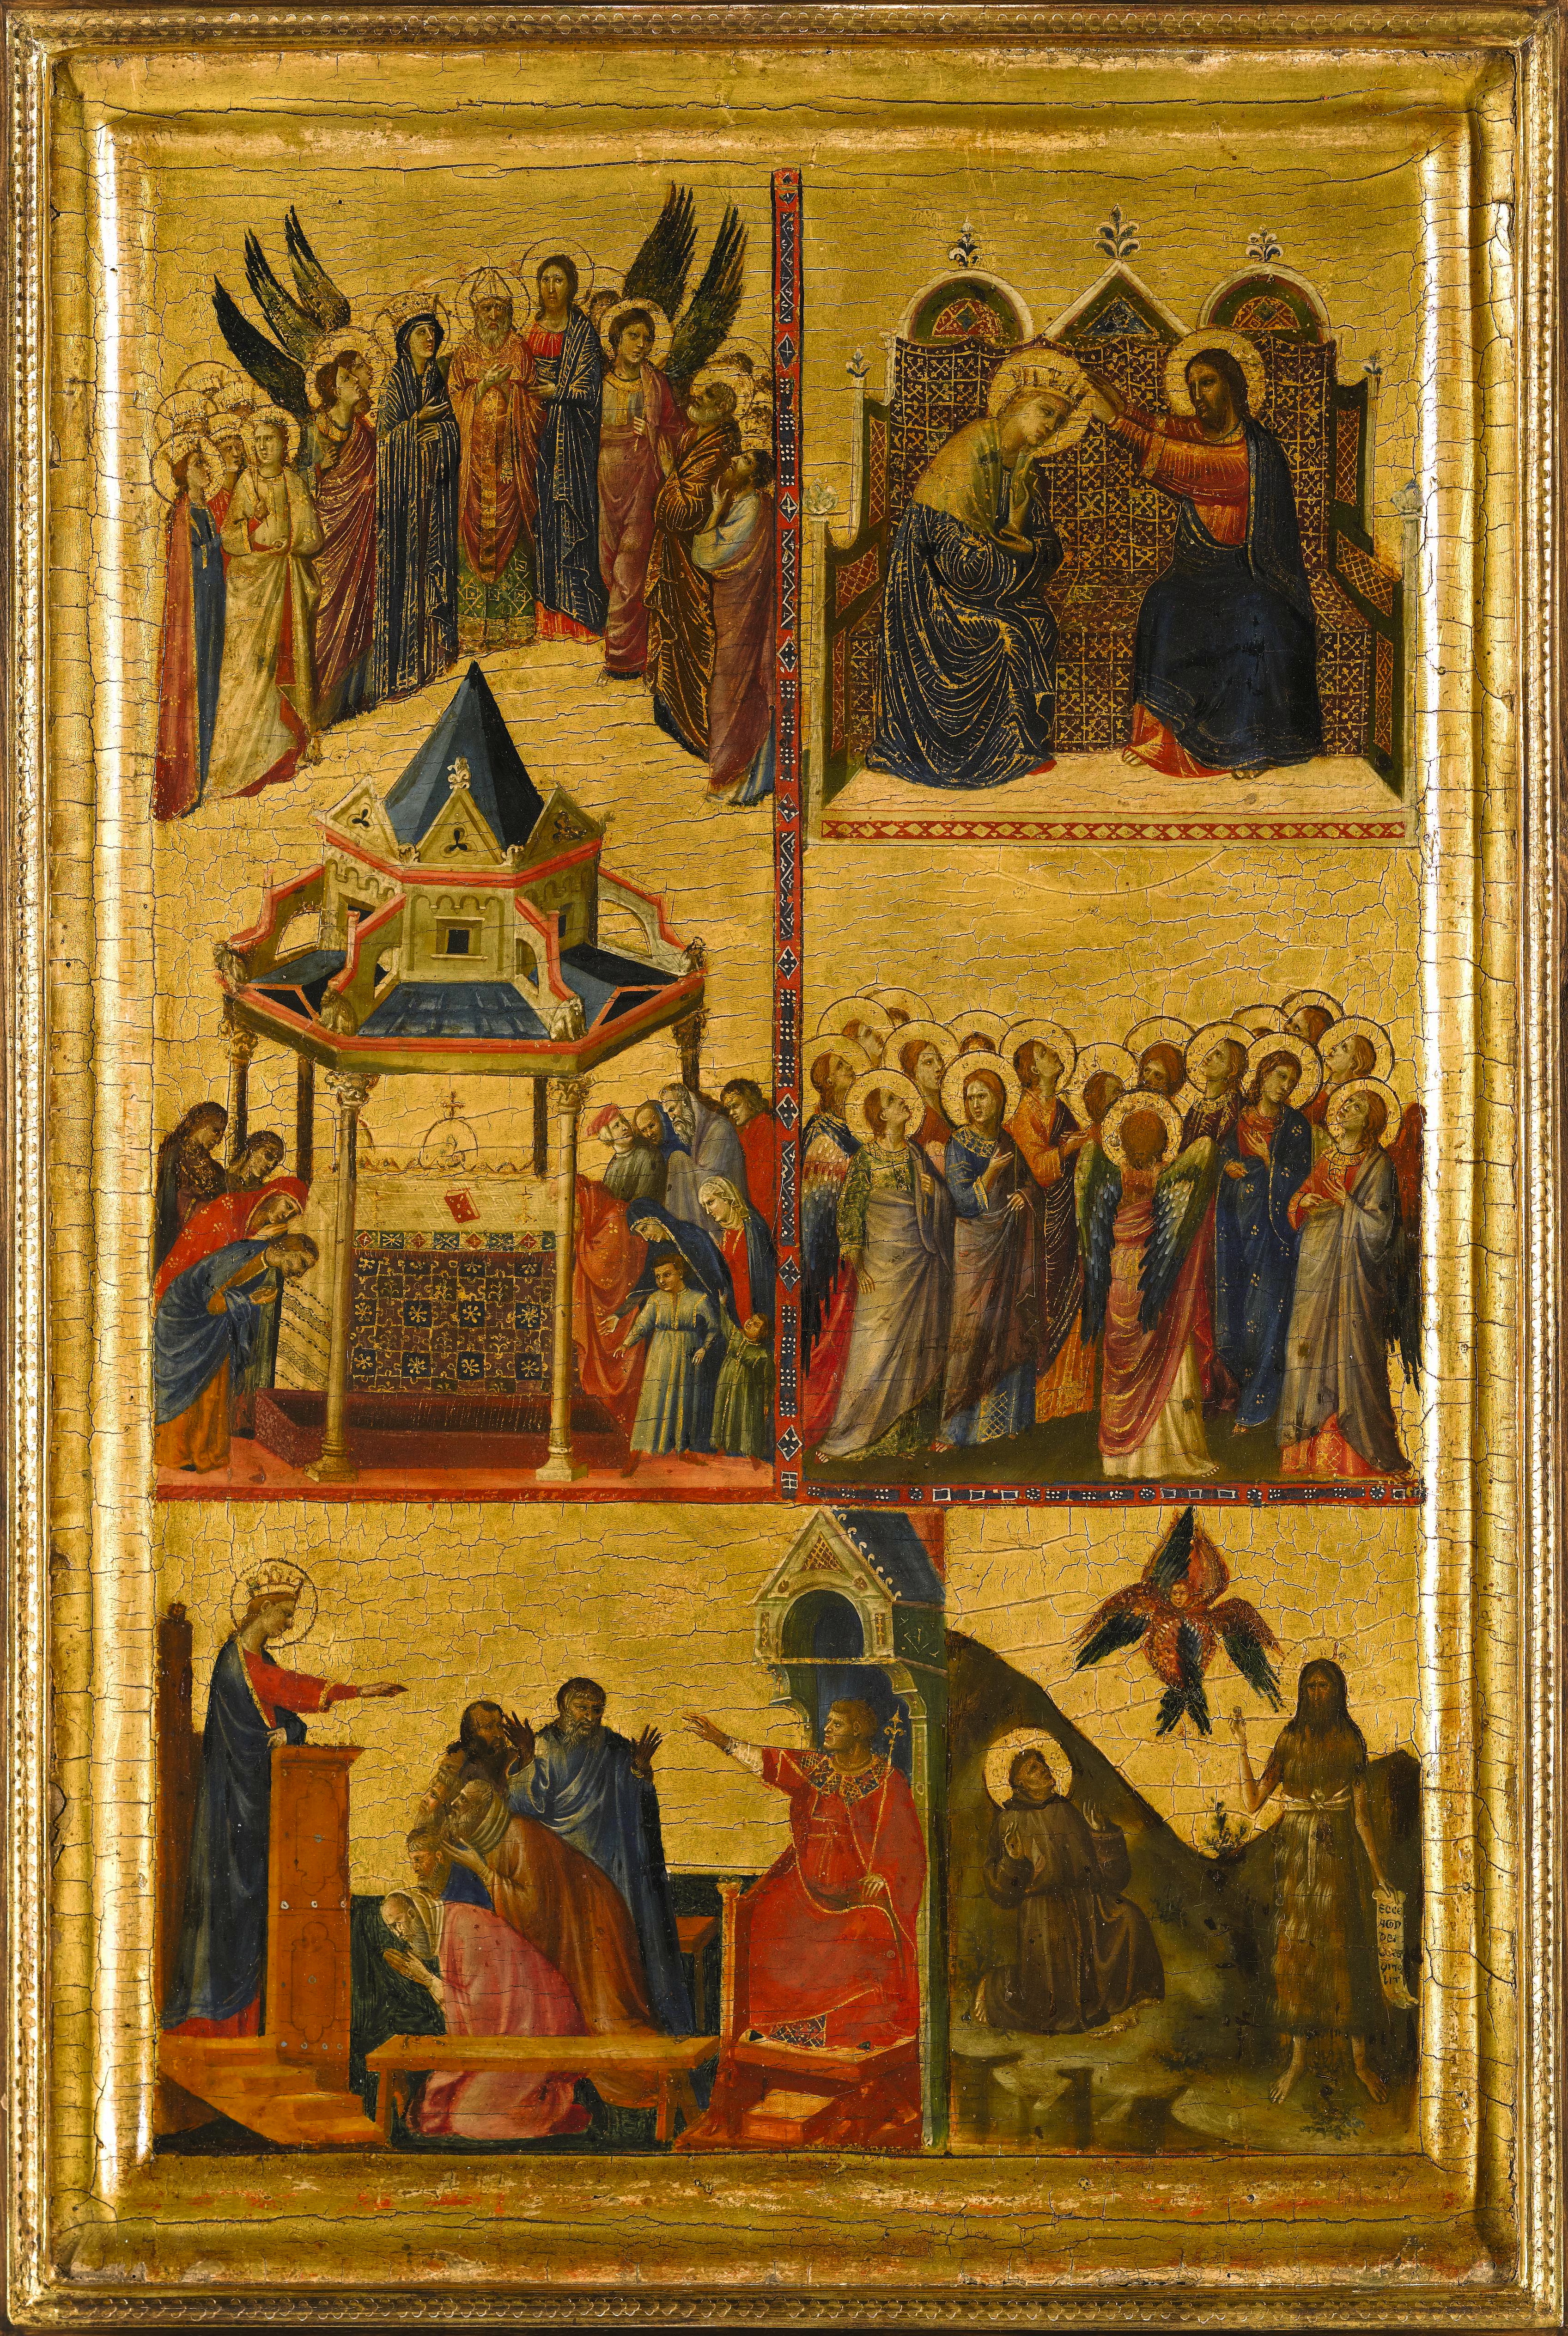 Makeup heir buys rare medieval panel for National Gallery – The History Blog